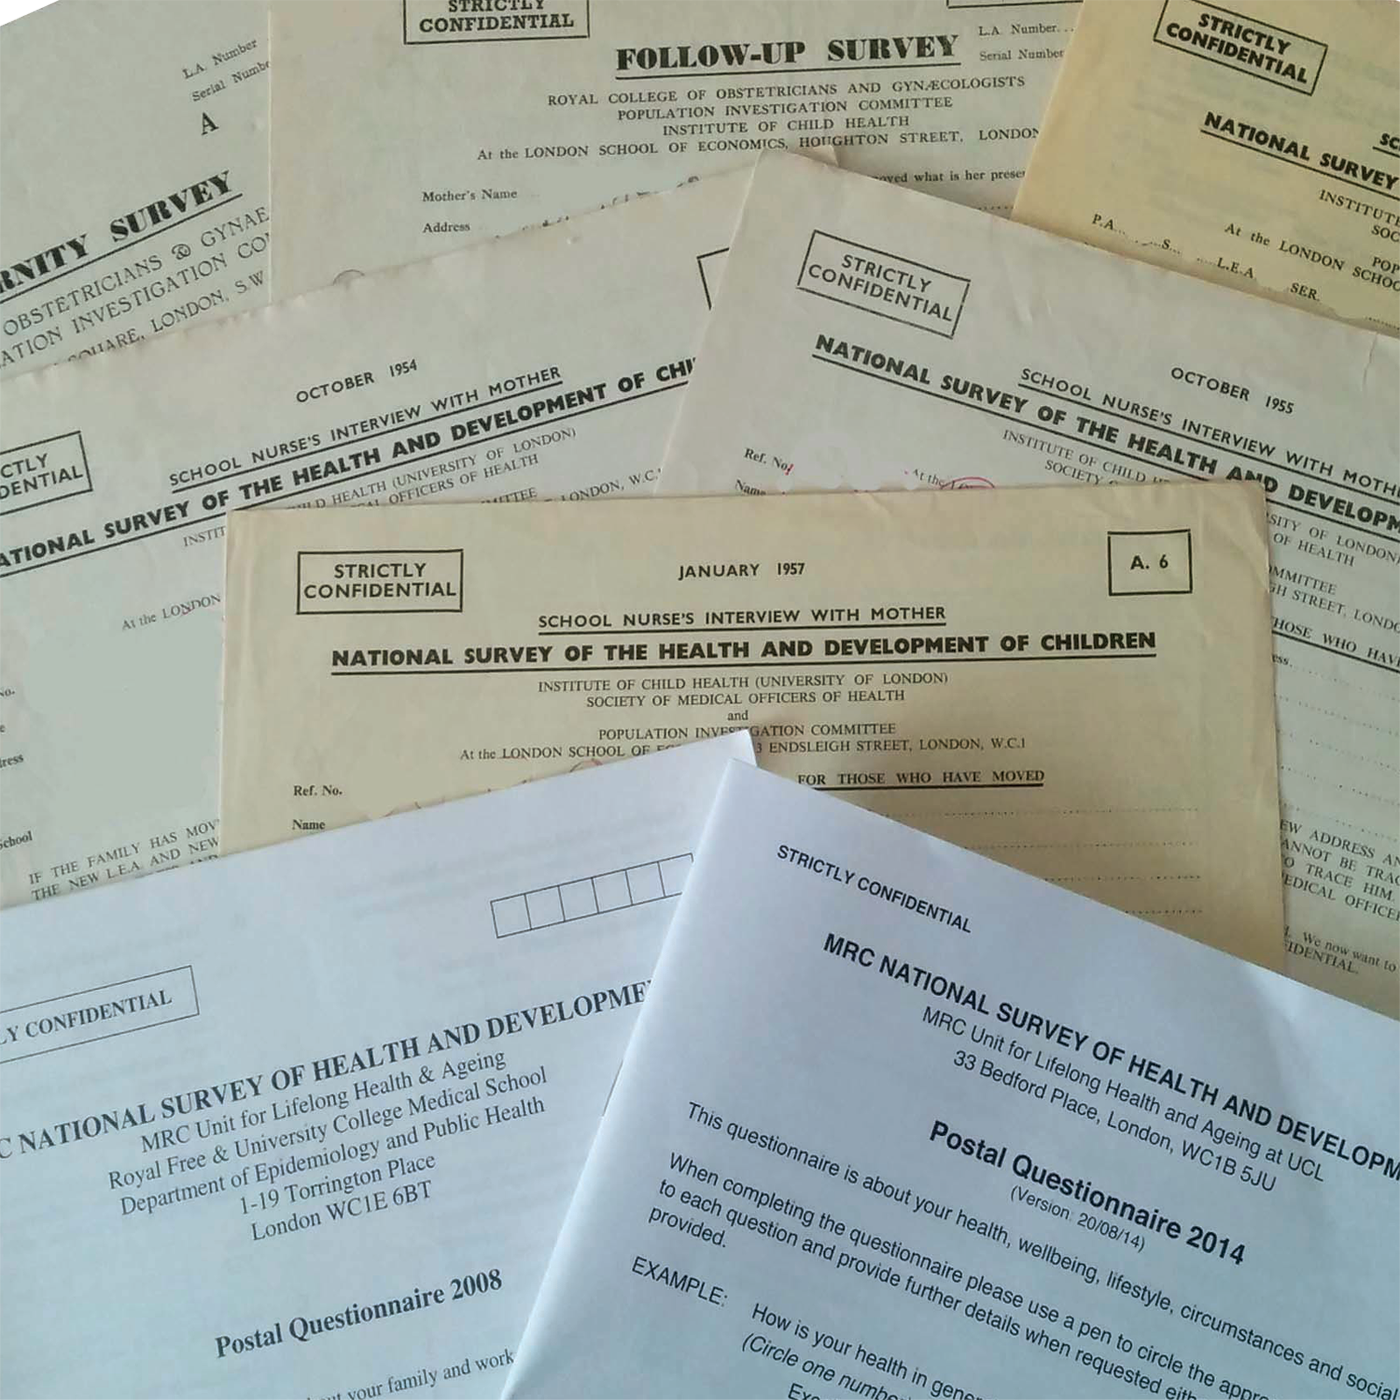 NSHD Questionnaires from various years